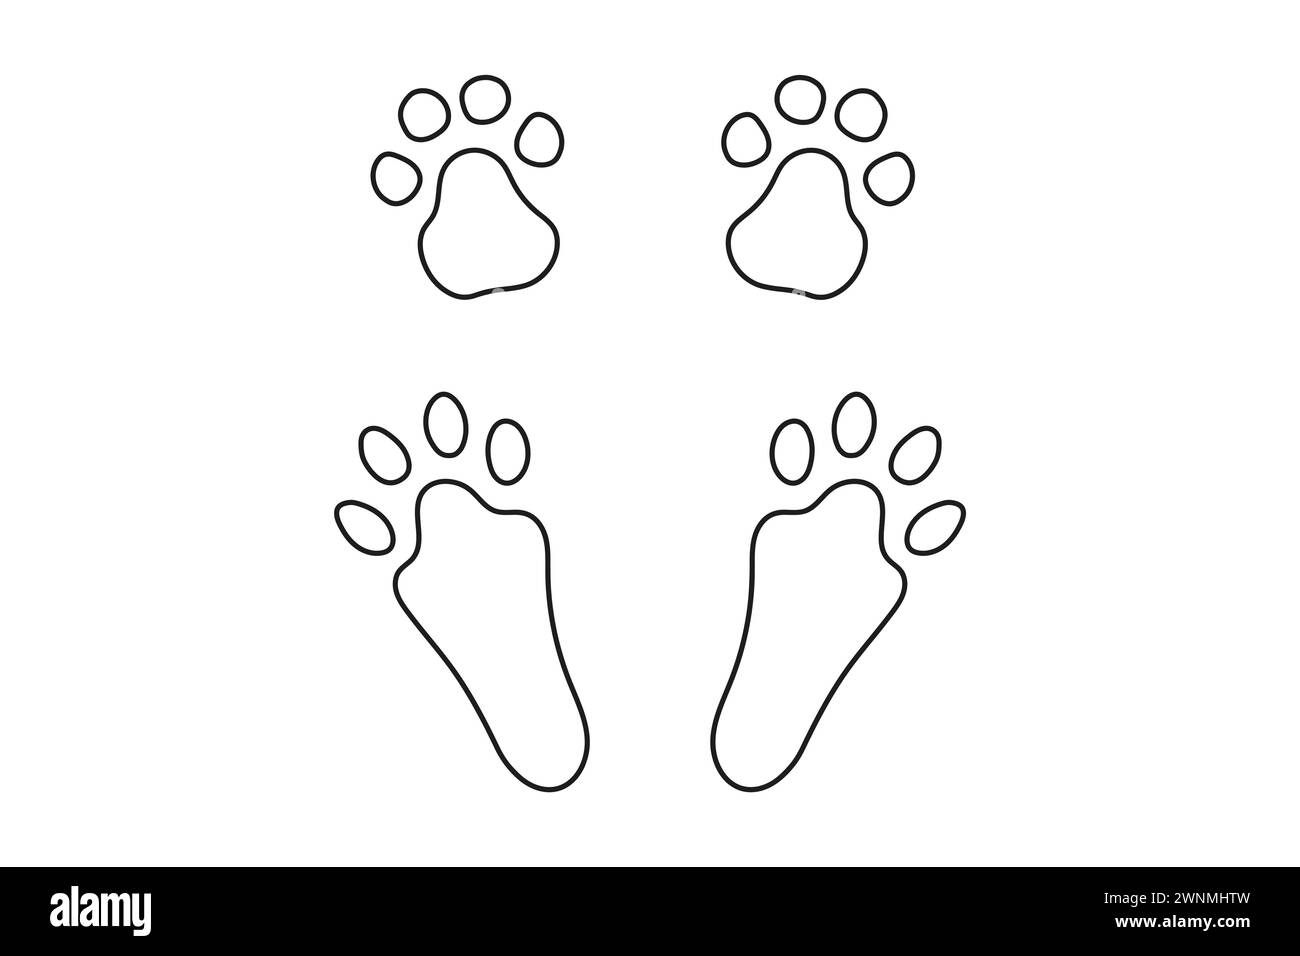 Rabbit or hare paw footprints. Paw prints of Easter Bunny. Black outline isolated on white background. Concept of animal tracks. Icon, symbol, print, Stock Vector